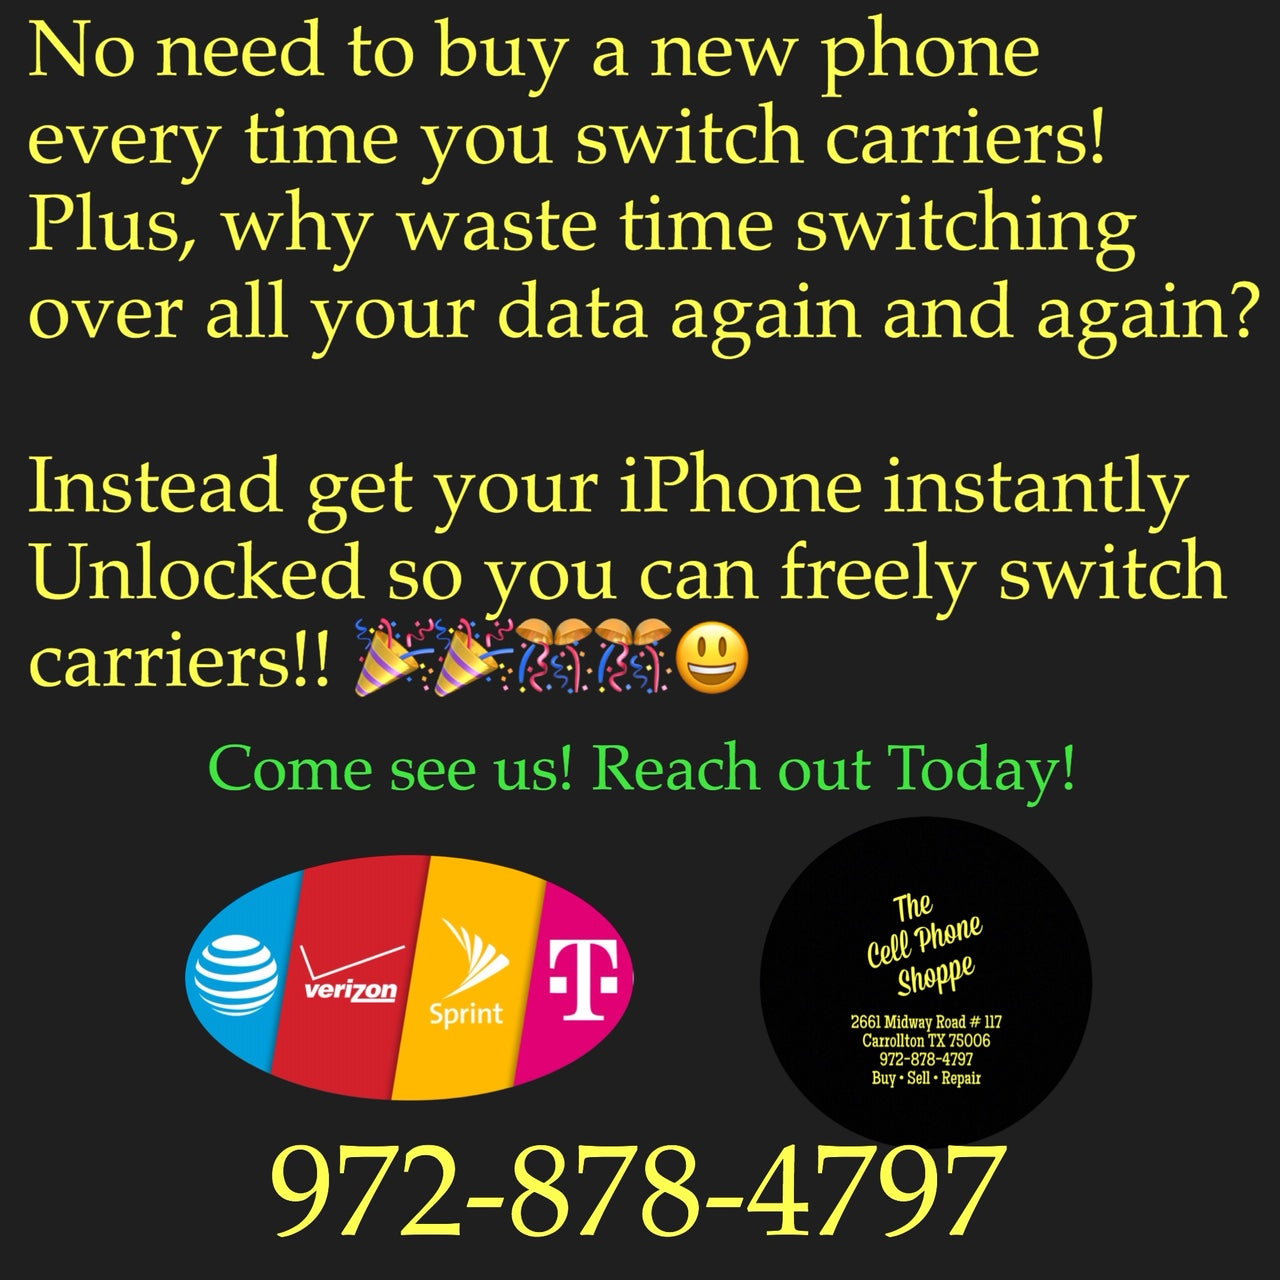 Thinking About Switching Carriers? No Need to get a new phone! Get your iPhone Unlocked Today!